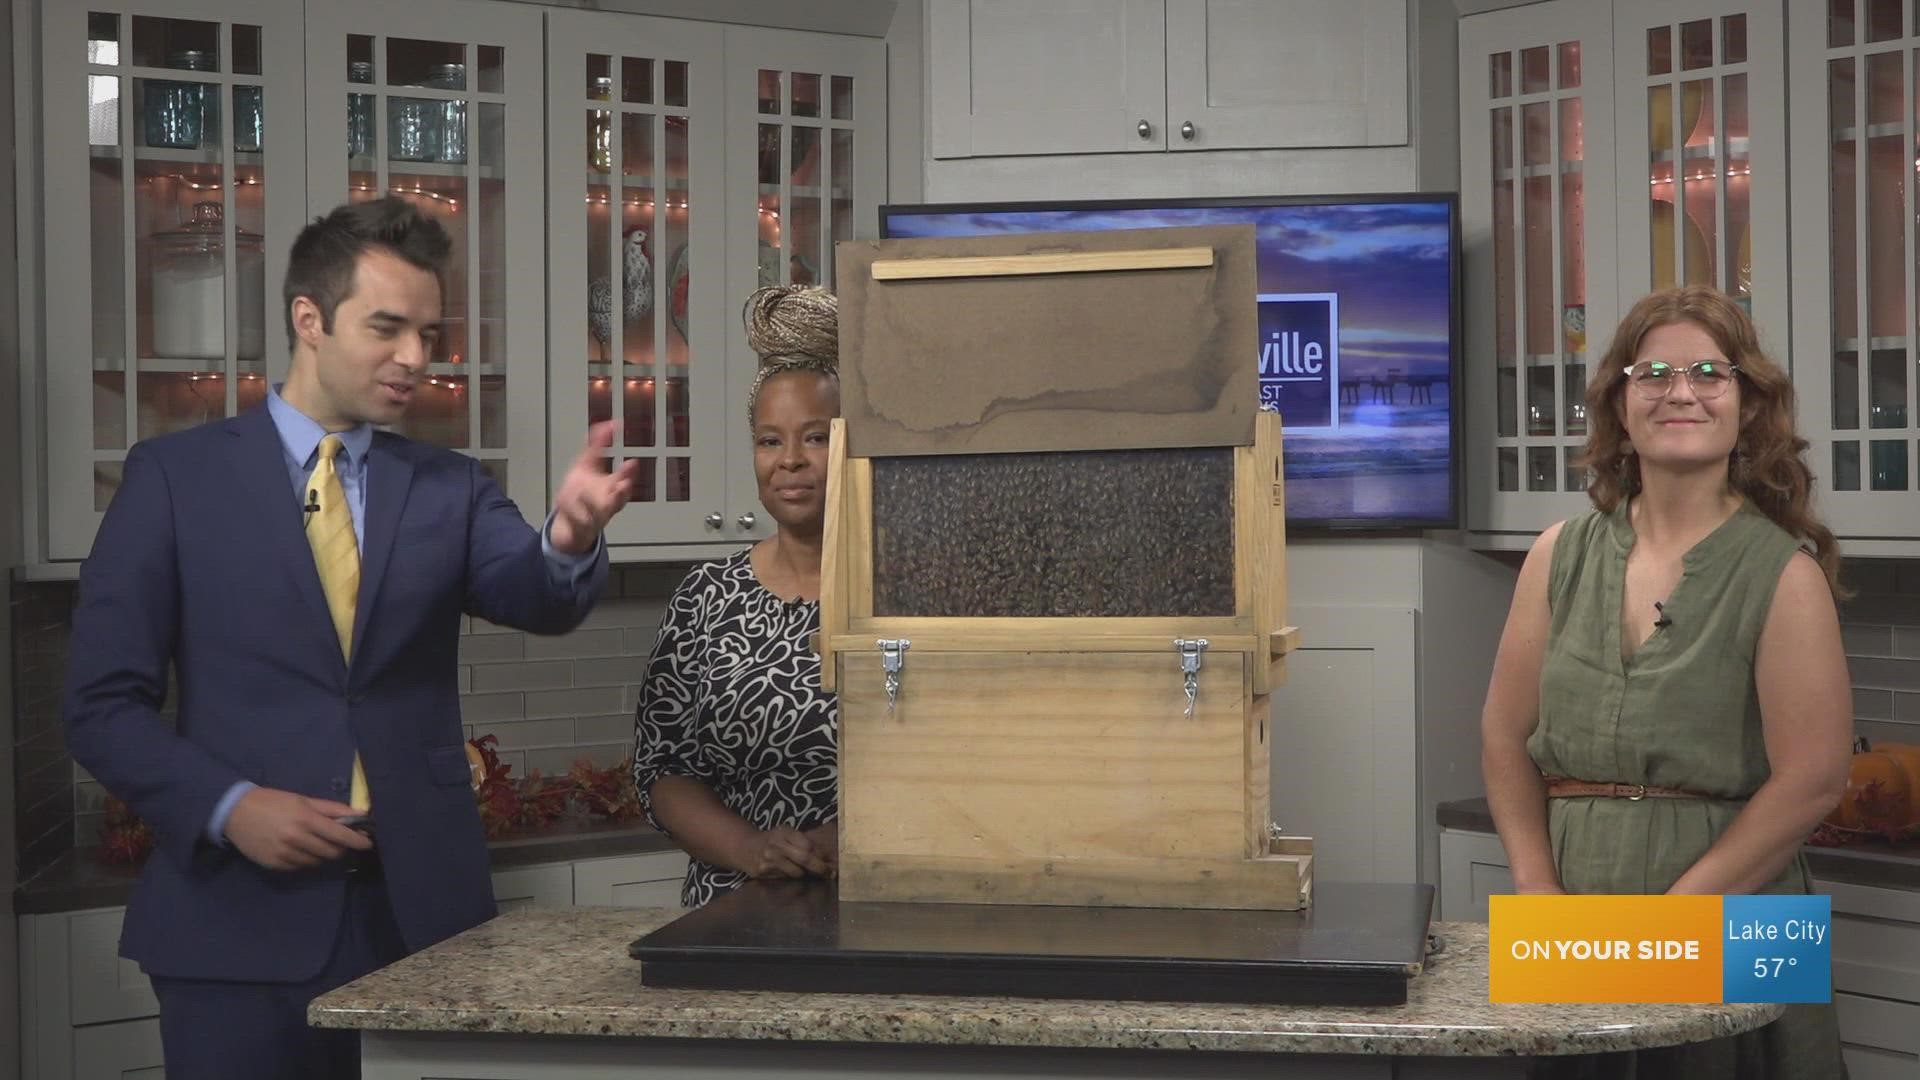 This morning on GMJ we were joined by Mallory Schott, Manager of White Harvest Farms and Mika Hardison, who is a beekeeper with The Herban Bee.